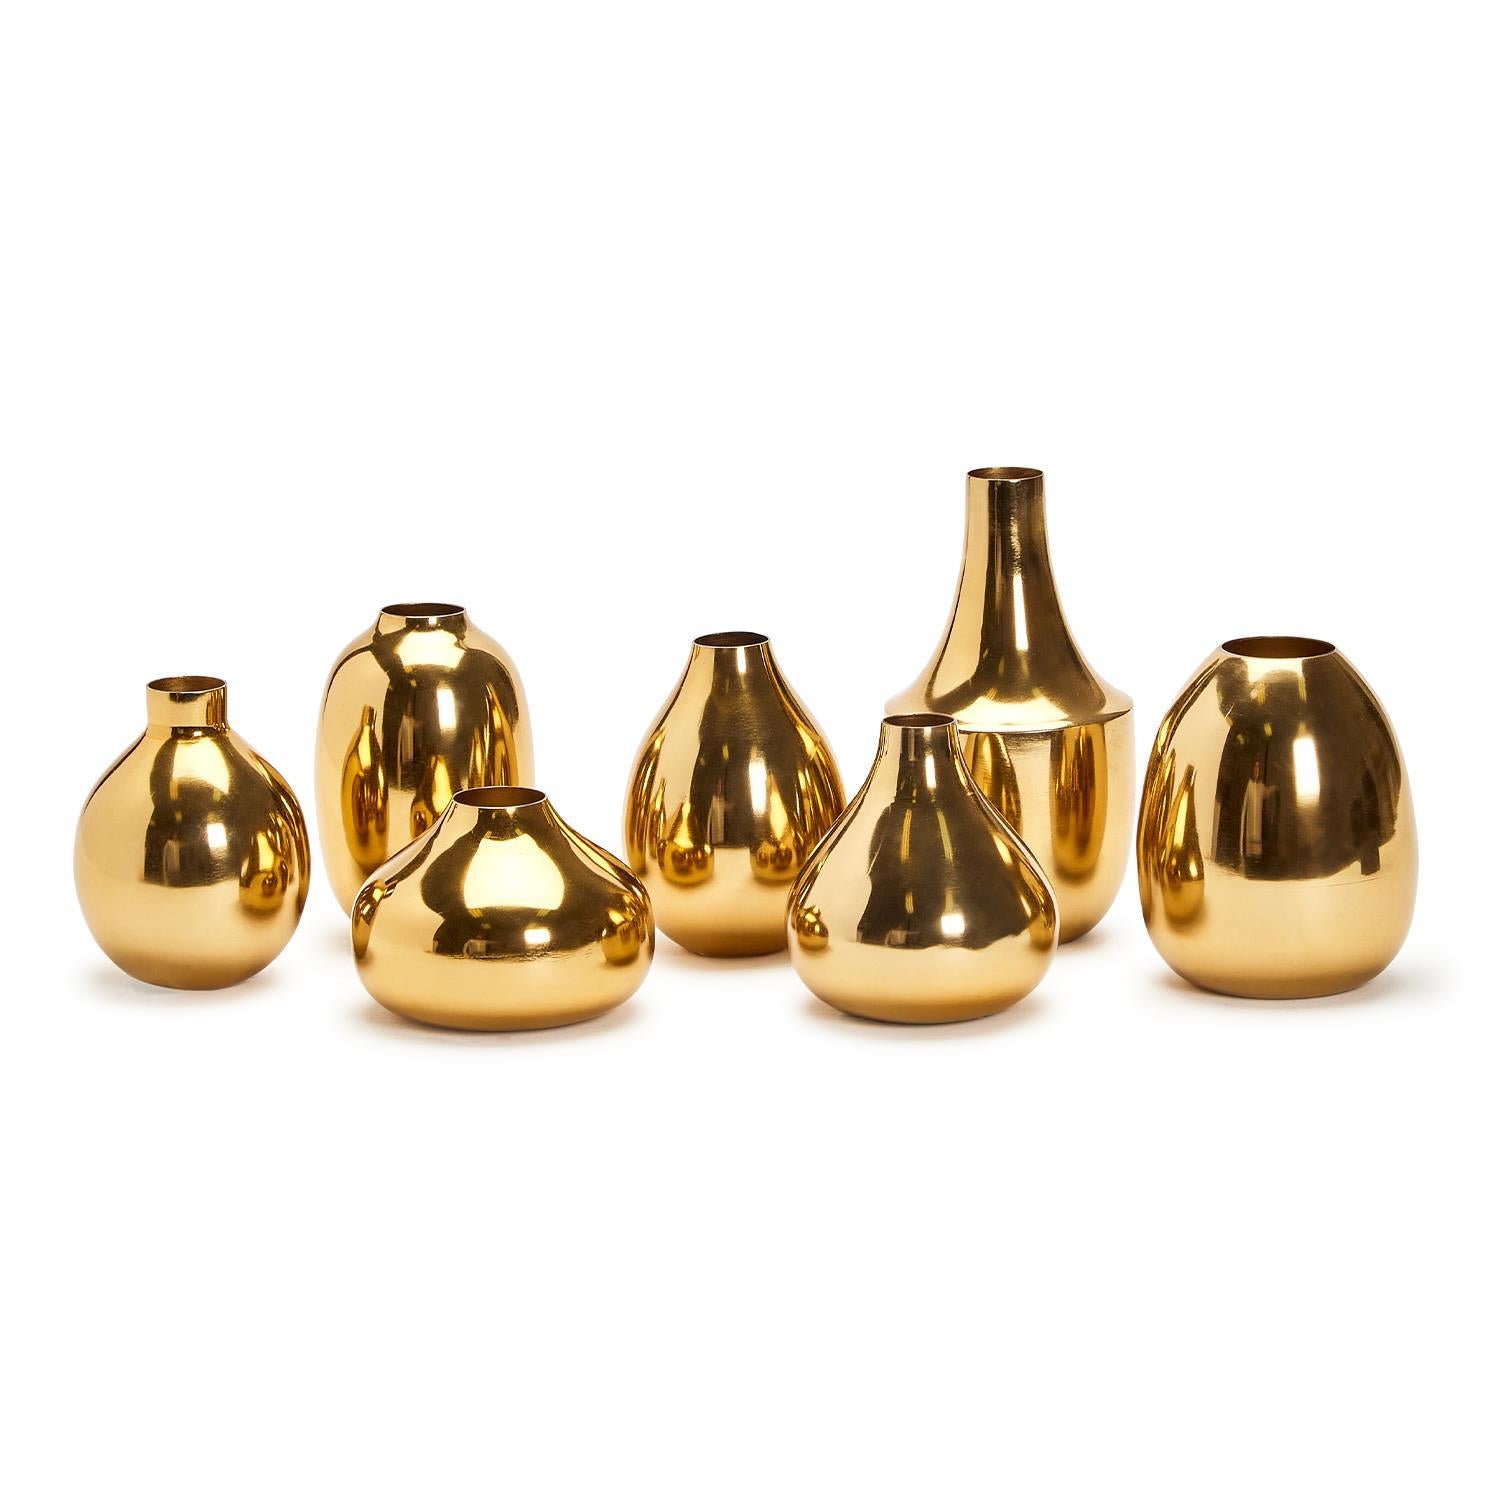 Gold-Plated Tabletop Vase